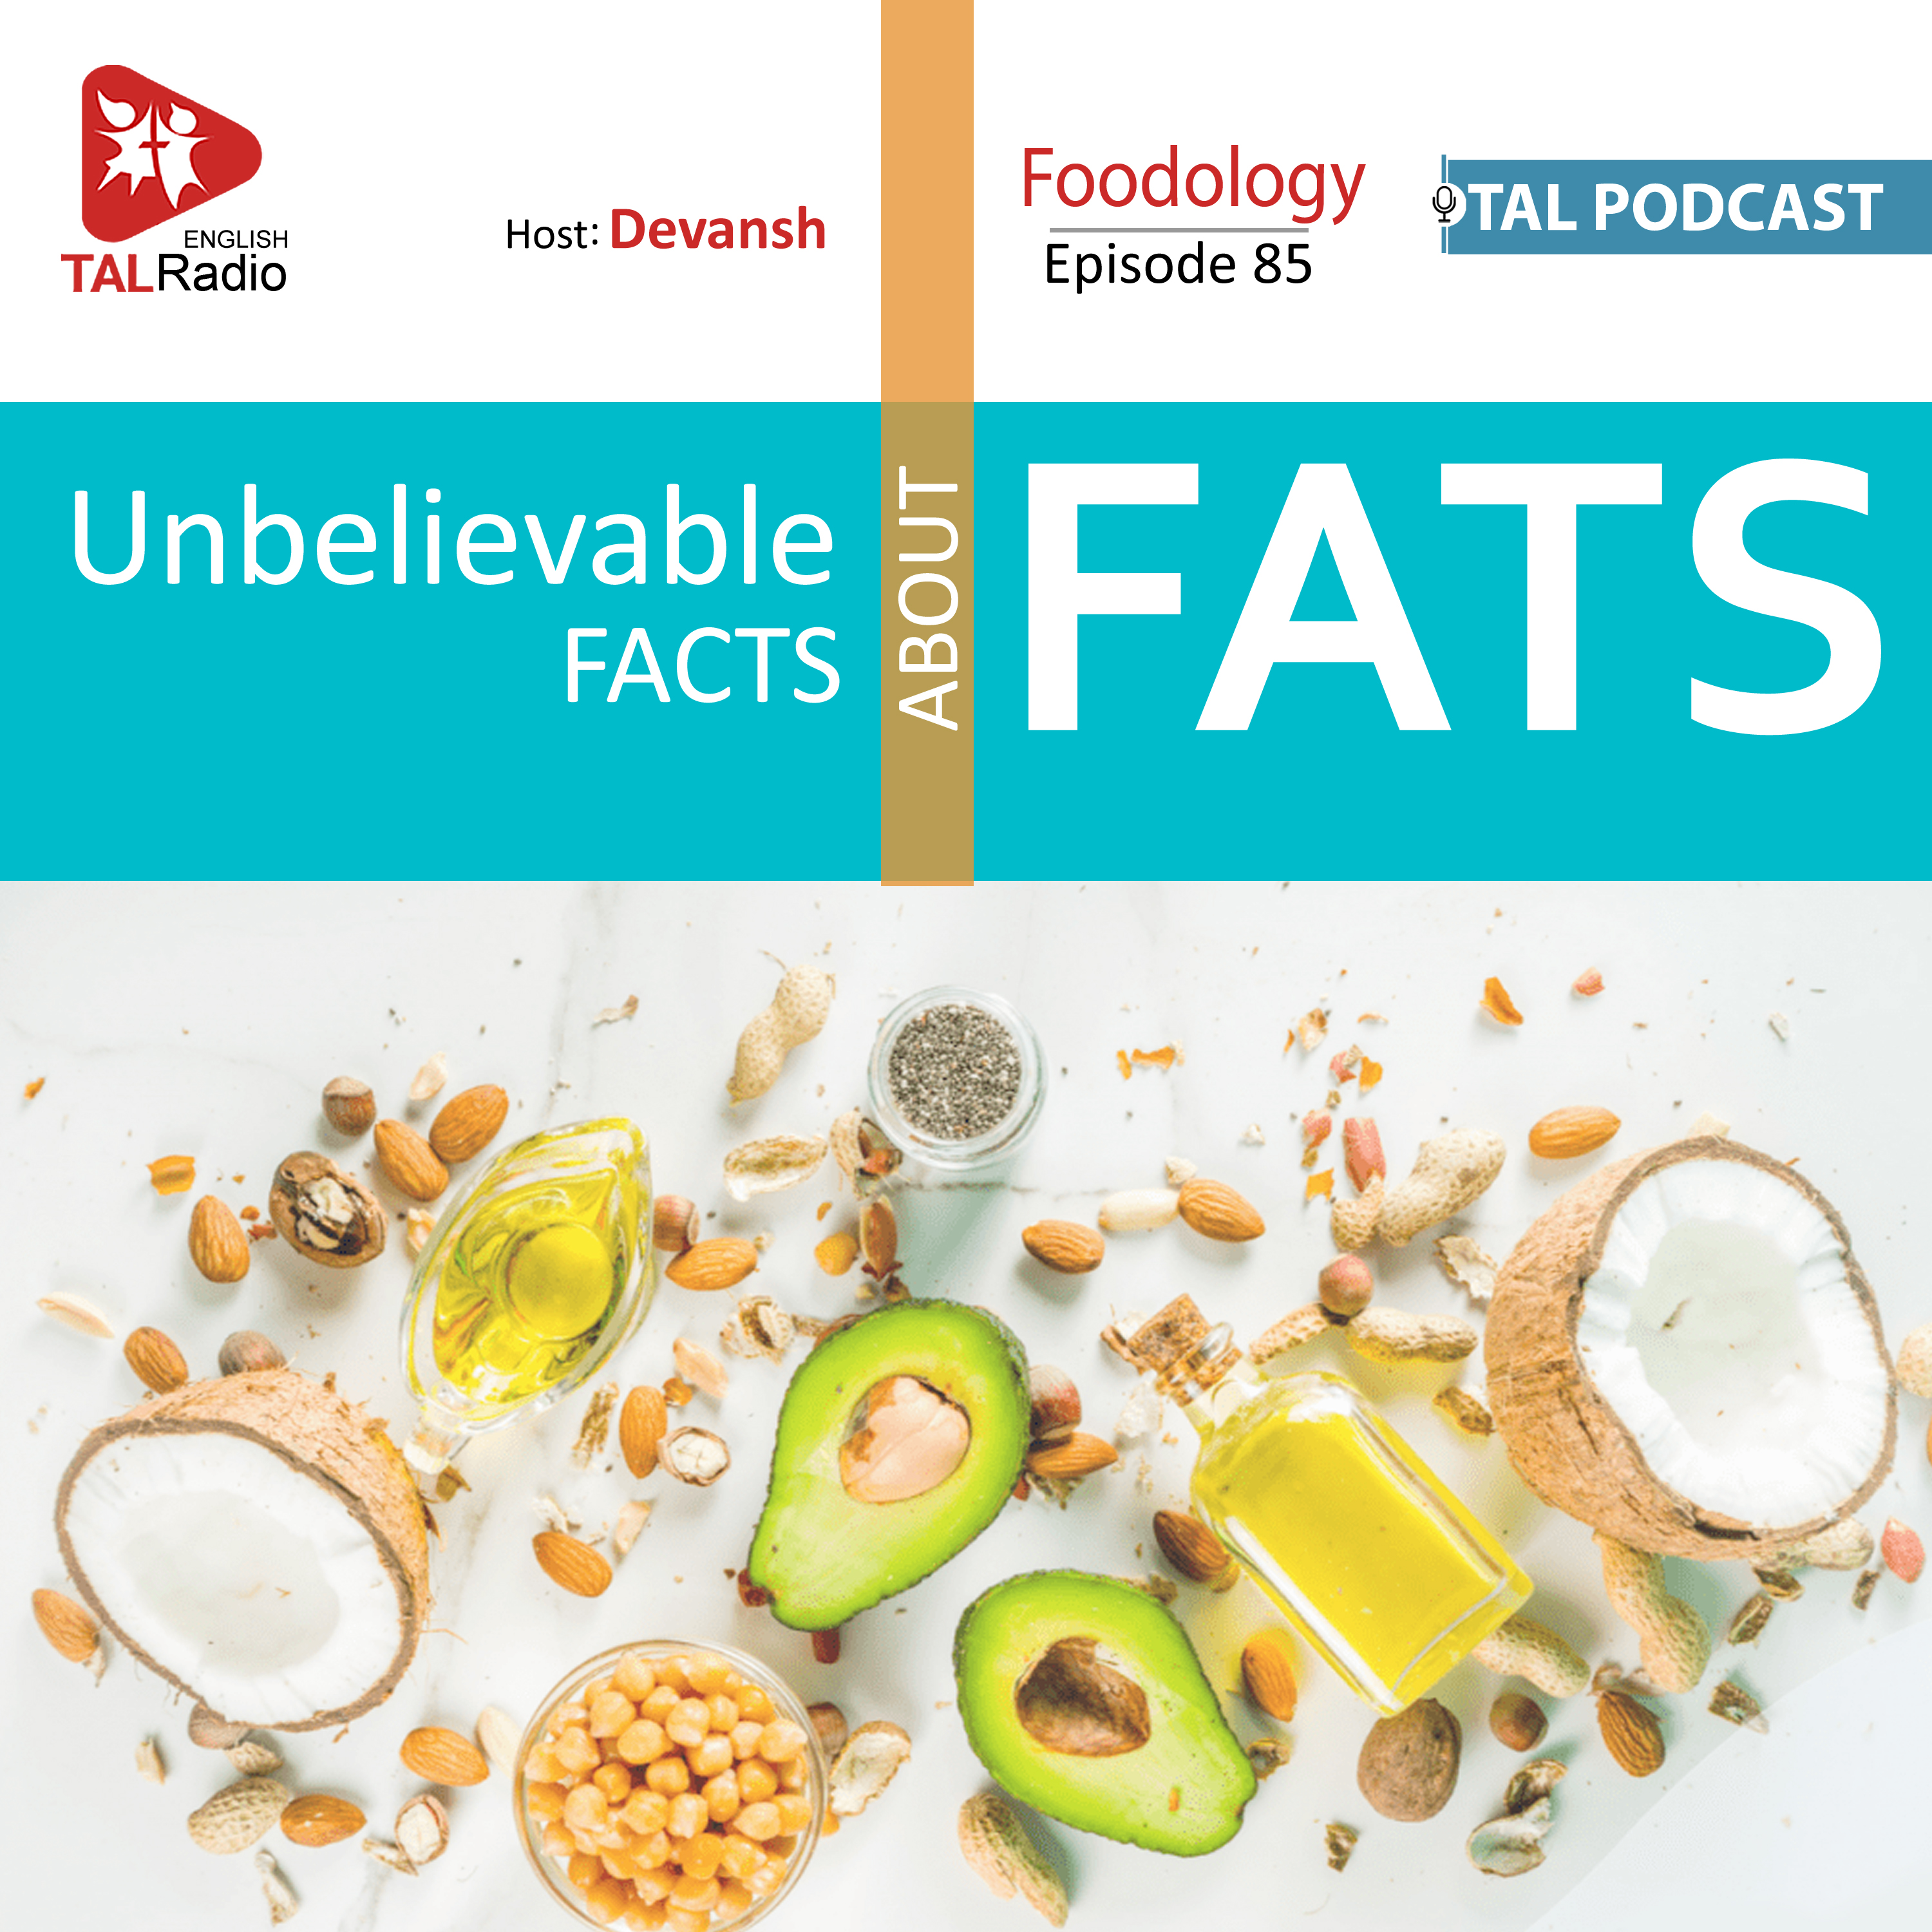 Unbelievable Facts about Fats | Foodology